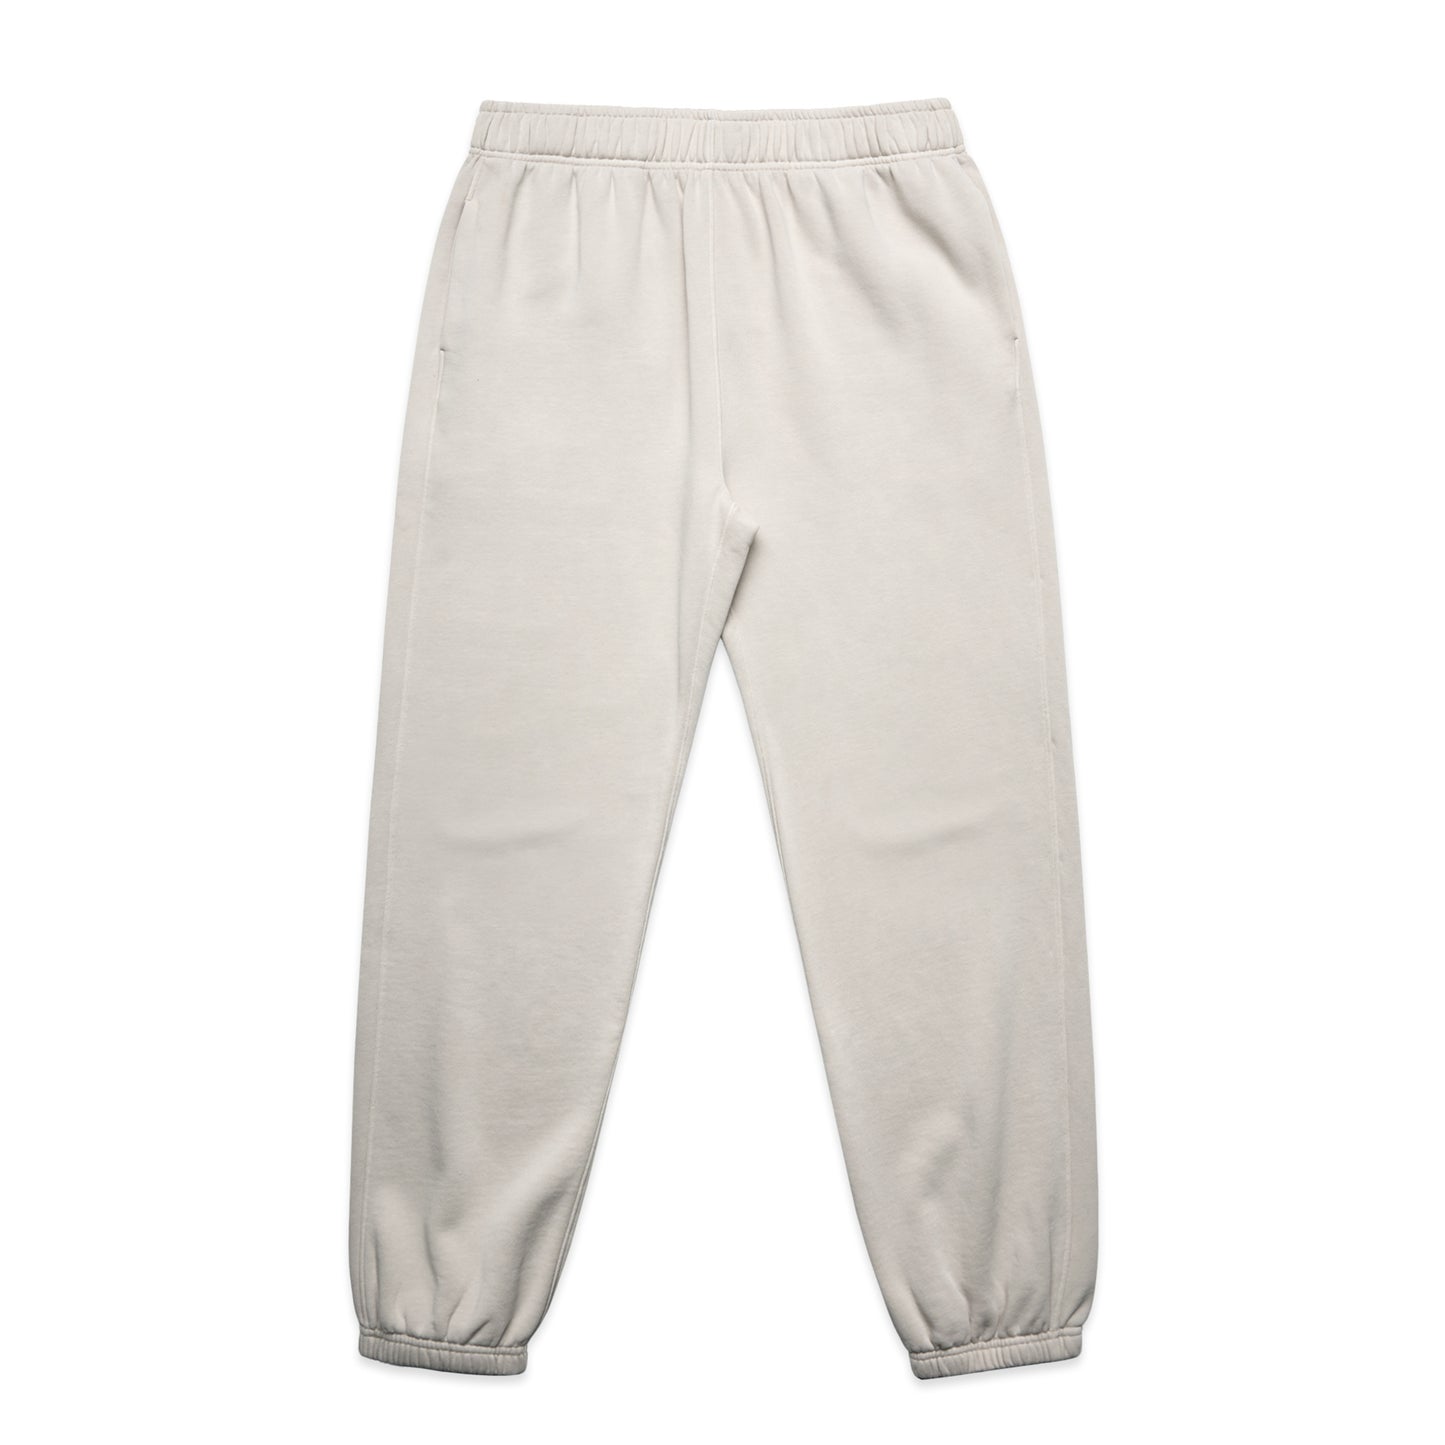 Ascolour Relax Faded Track Pants (5938)